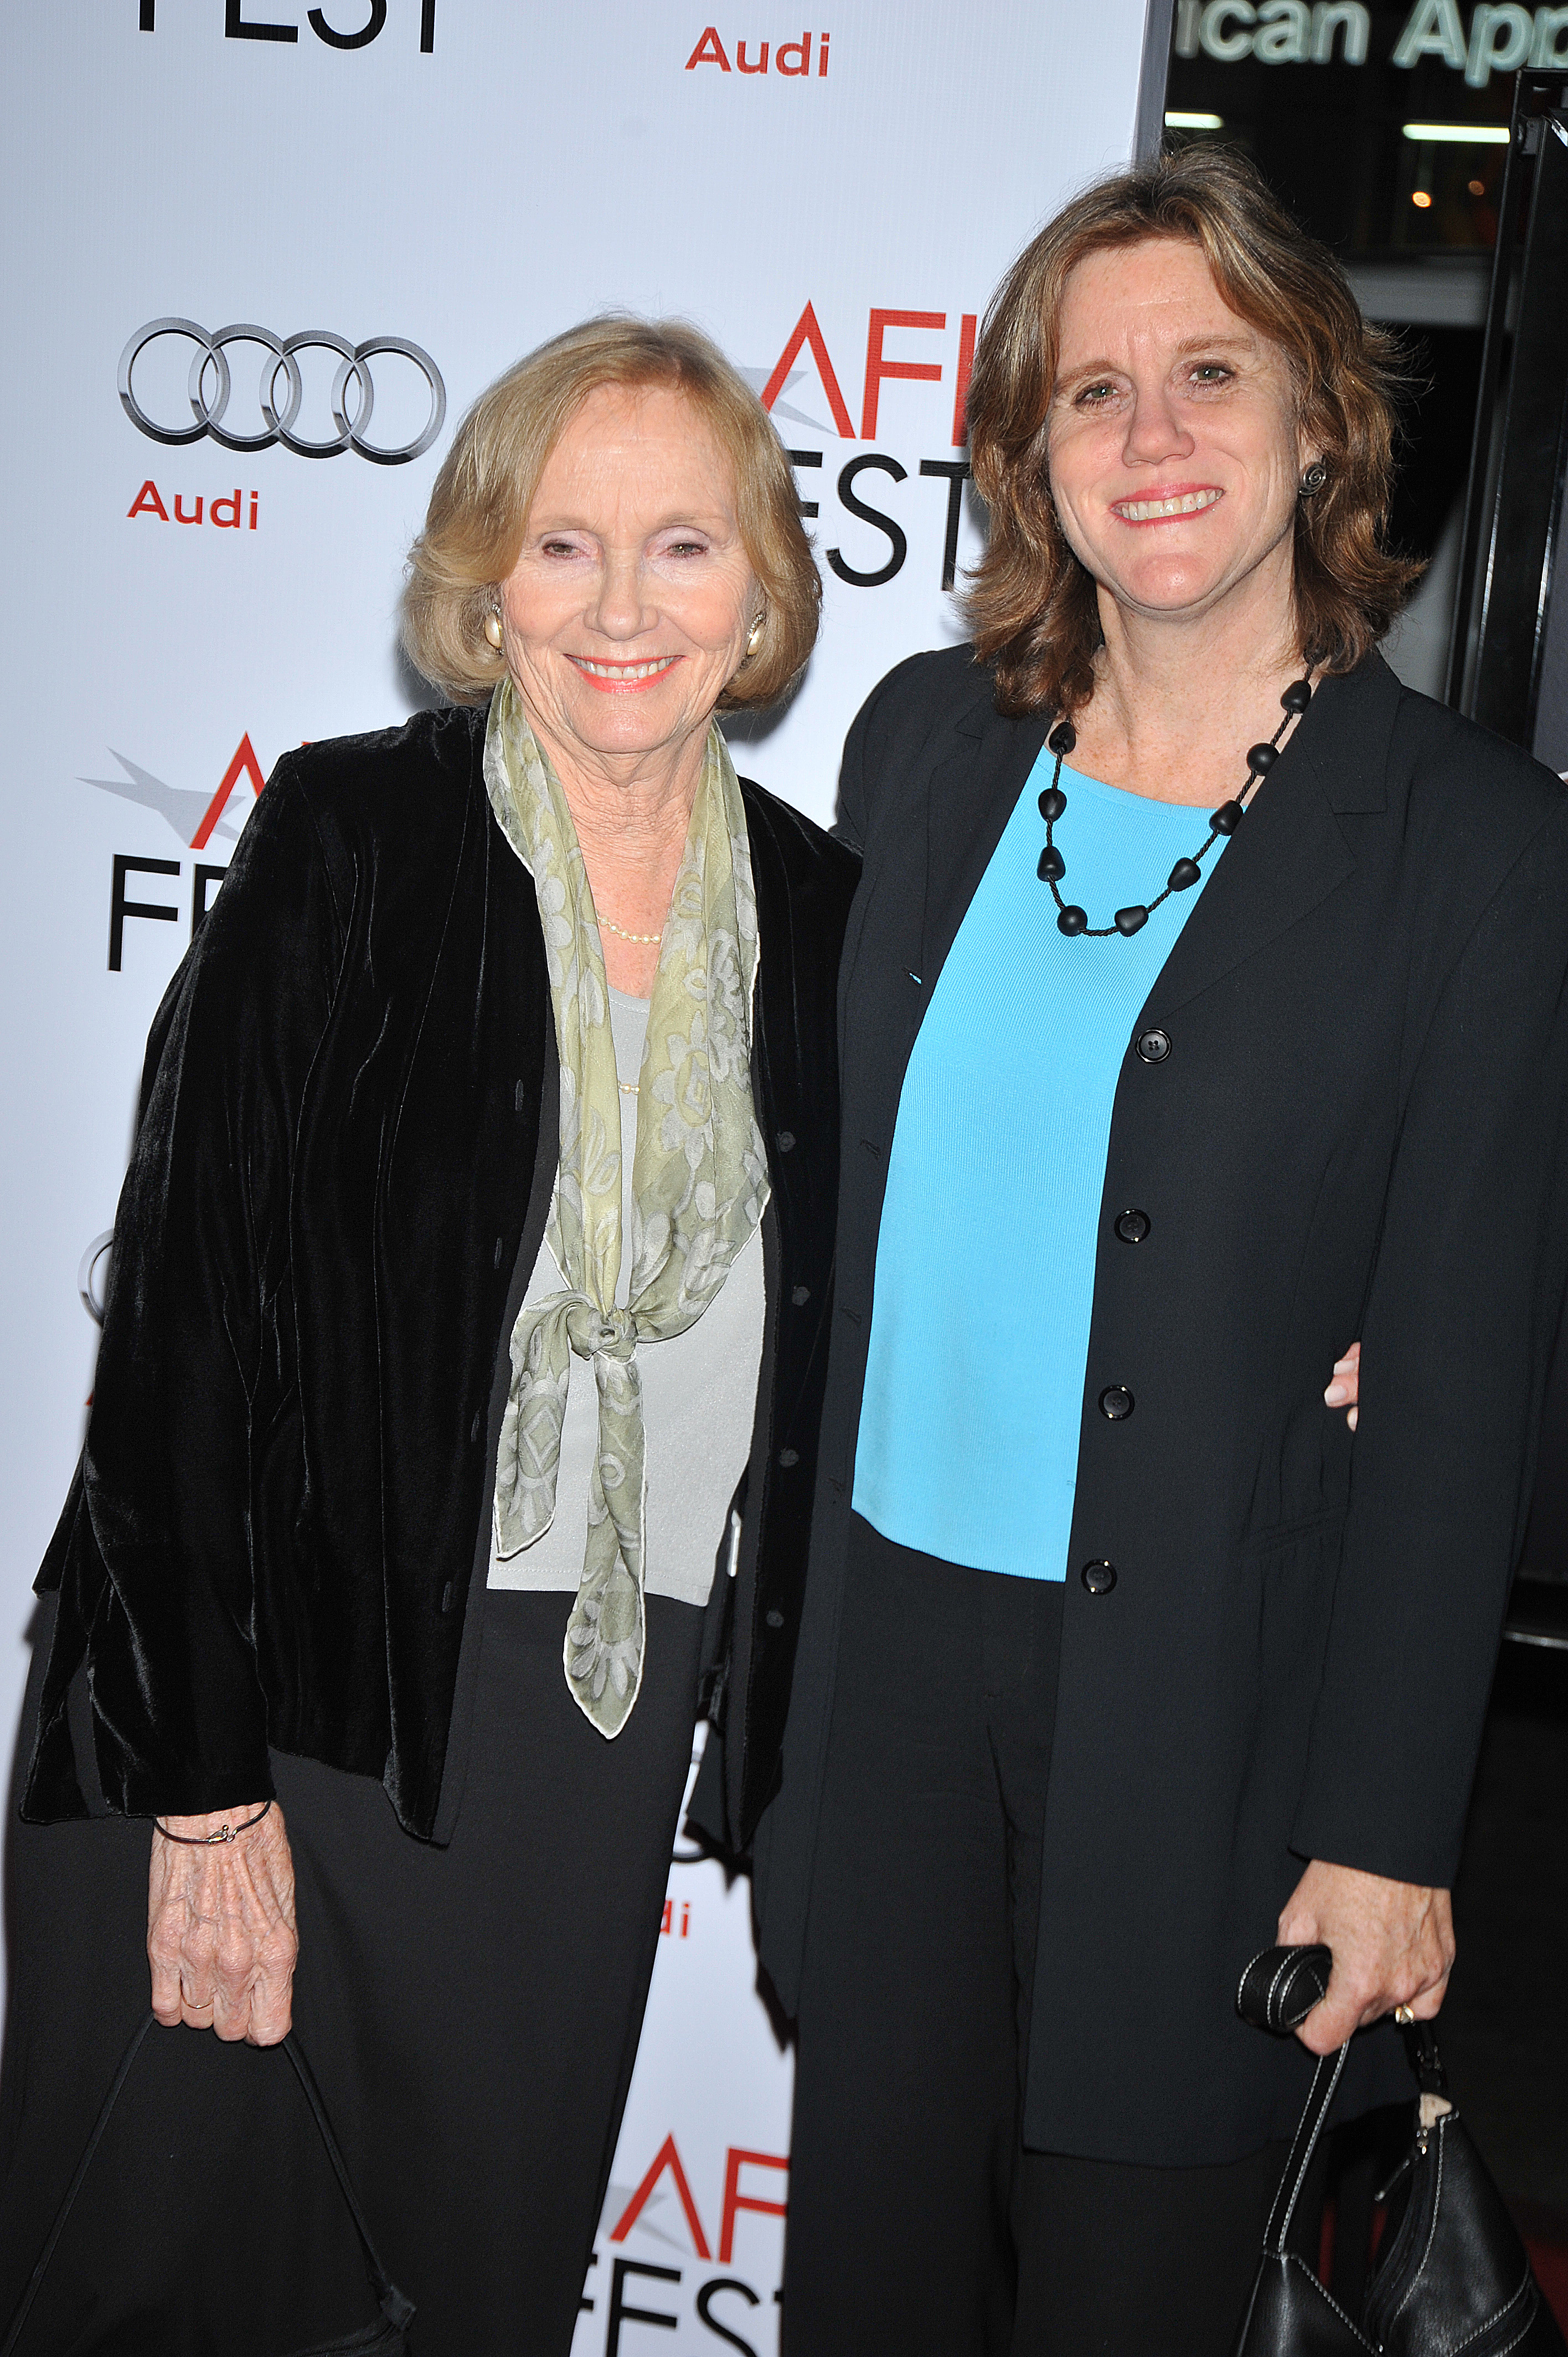 Eva Marie Saint and Laurette Hayden at the USA - AFI Festival in 2009 | Source: Getty Images